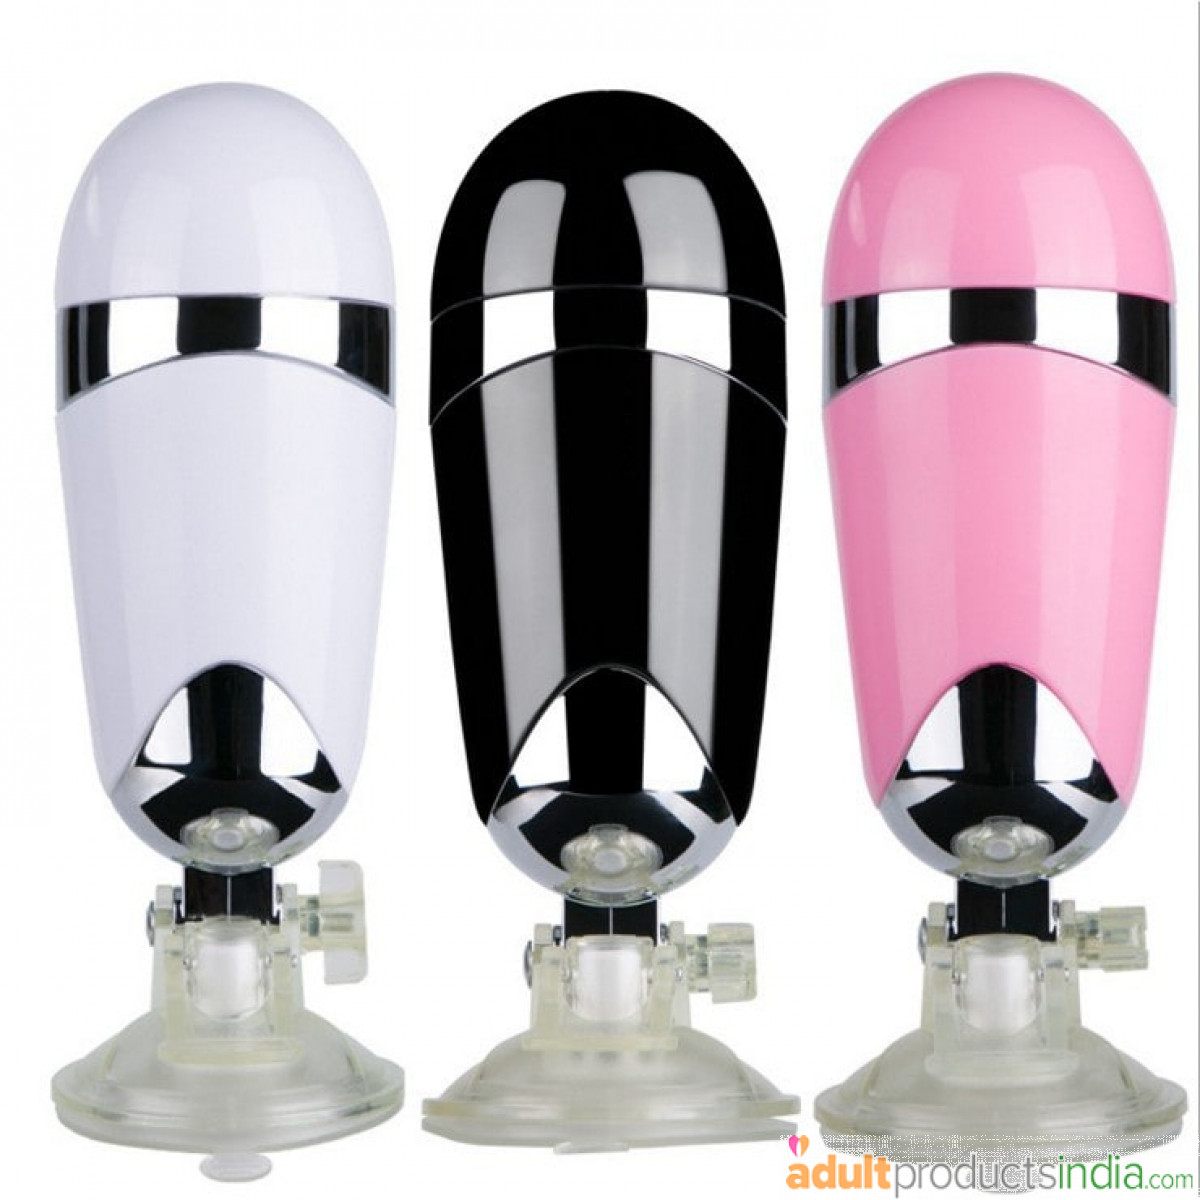 Hands-free aircraft cup male masturbator for Men 